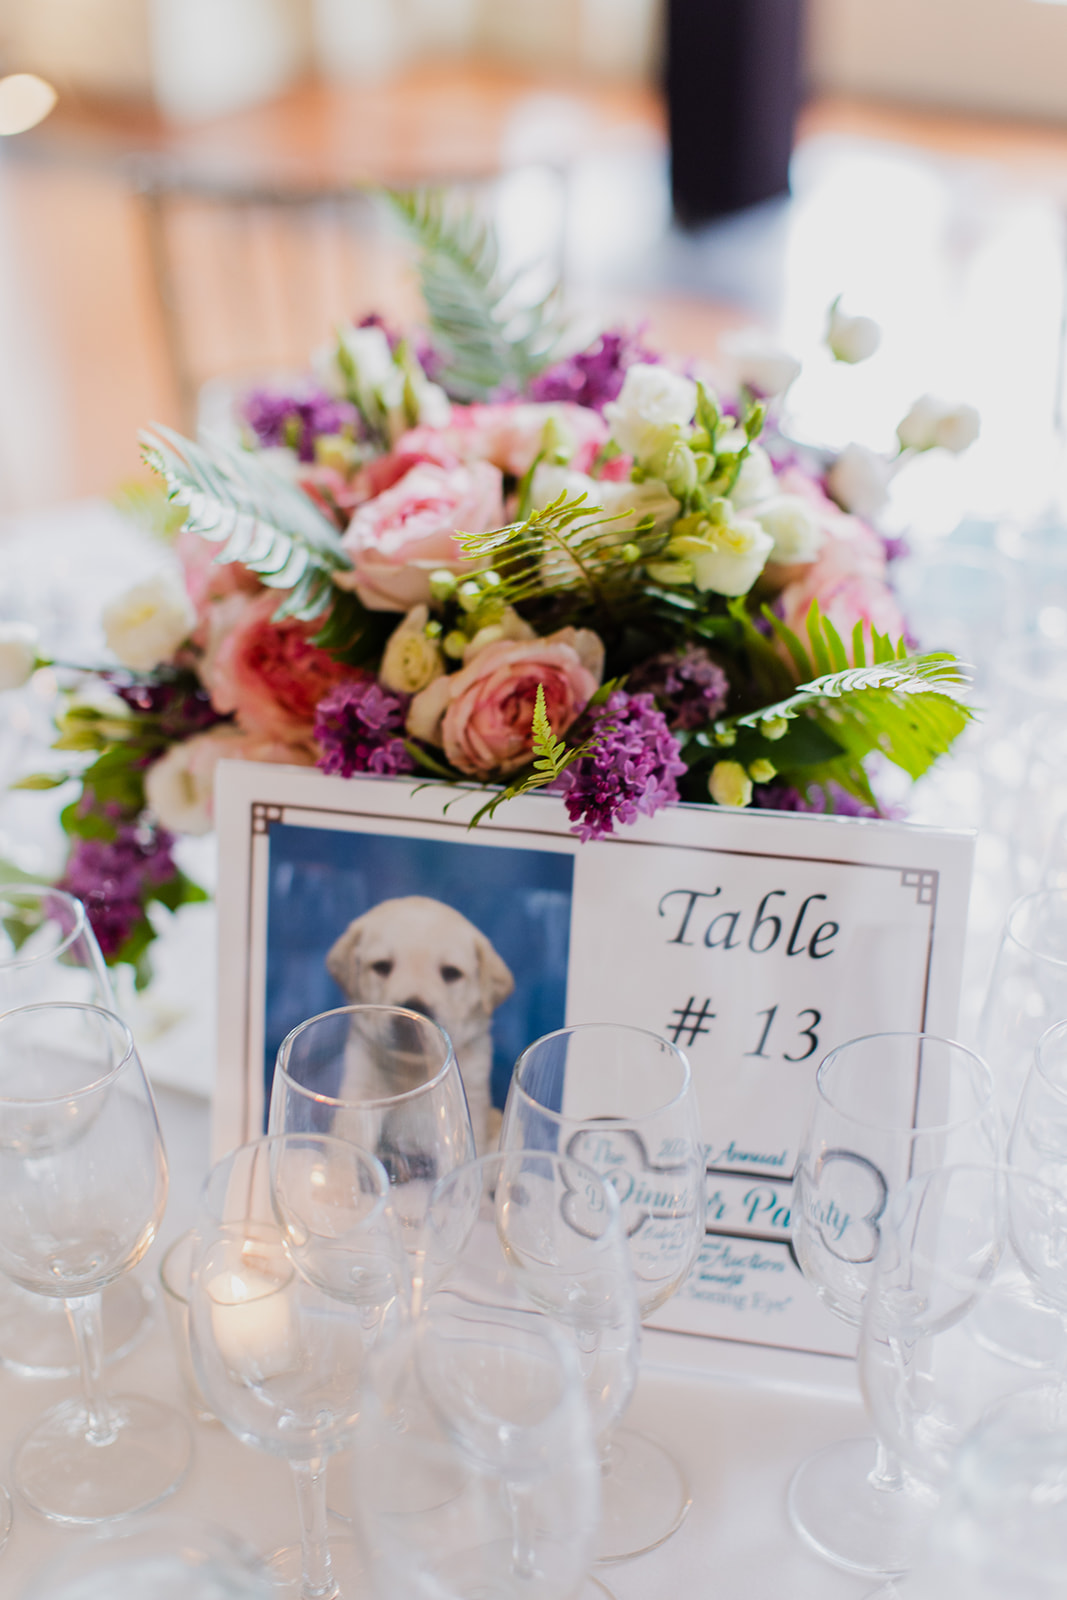 A close-up of the table arrangements. Center pieces consisted of a photo of a Seeing Eye puppy and bright spring flowers.